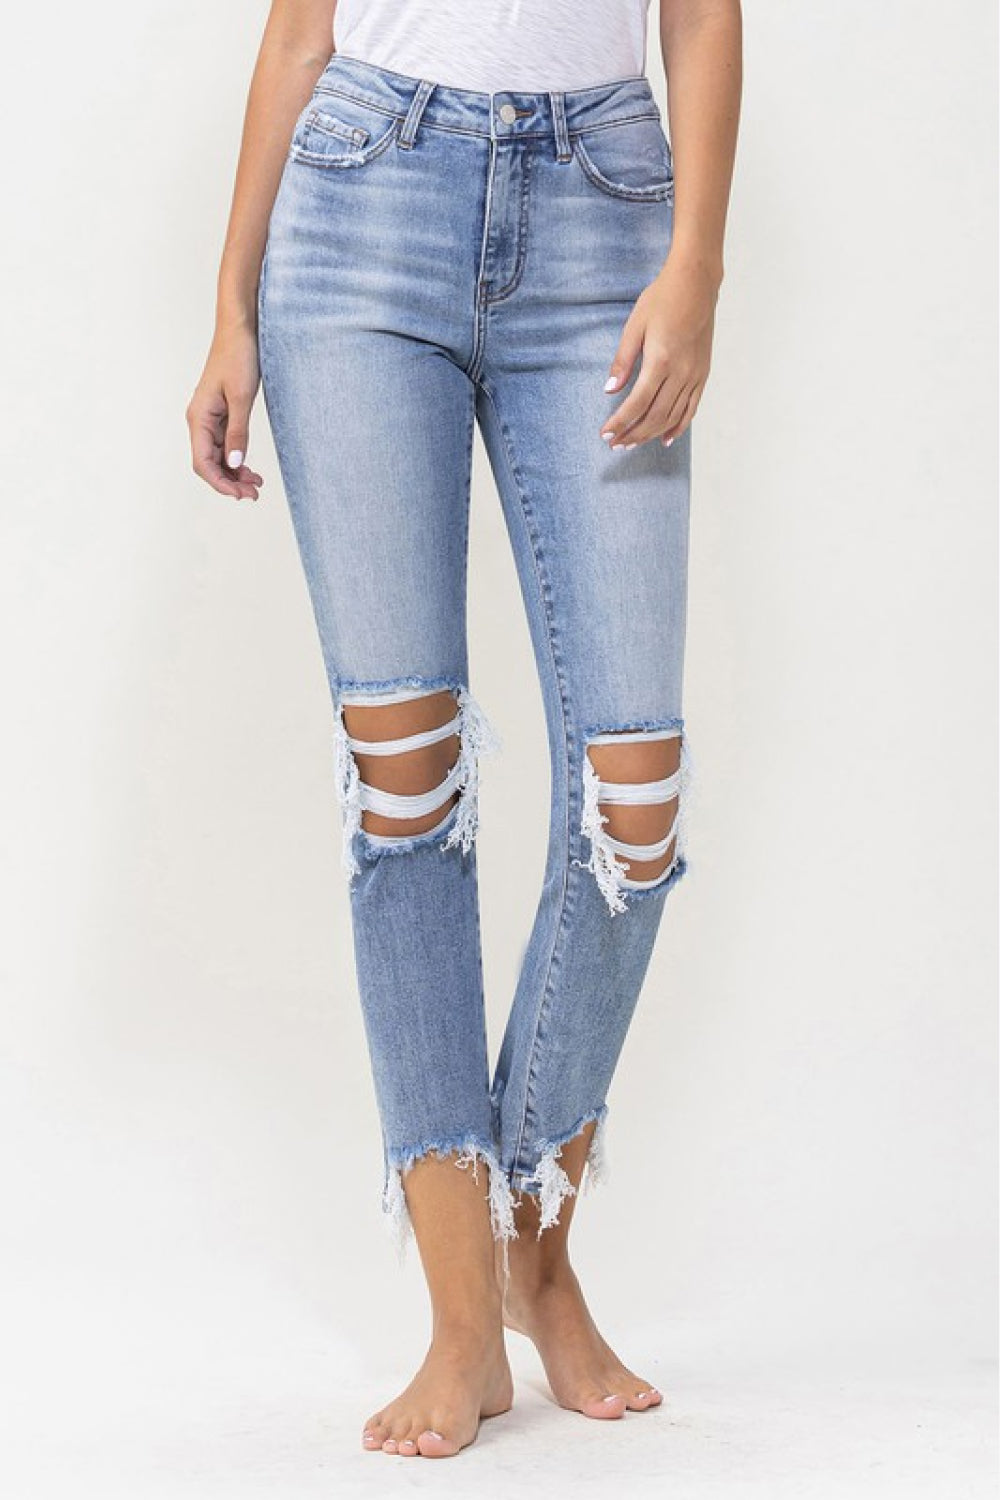 Load image into Gallery viewer, Courtney Super High Rise Kick Flare Jeans
